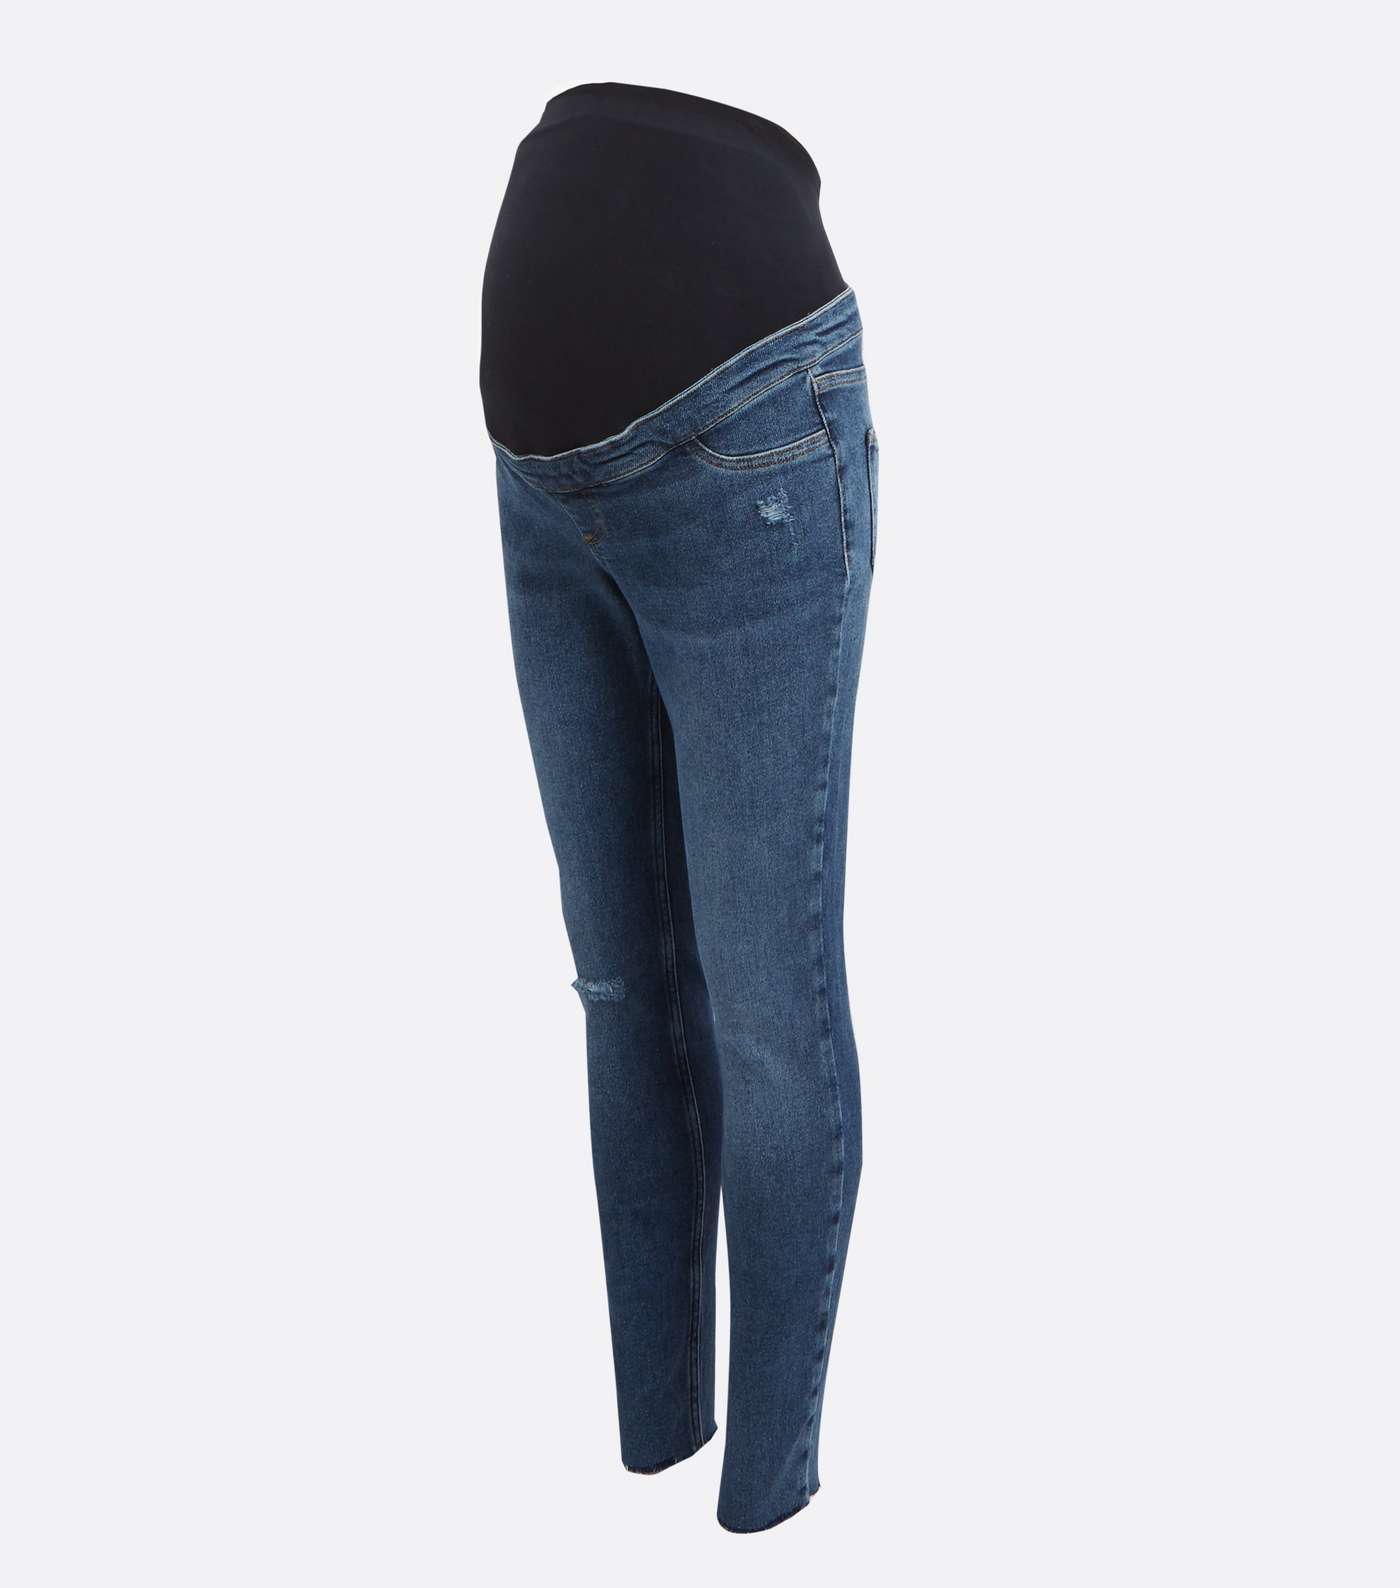 Curves Maternity Blue Ripped Over Bump Jenna Skinny Jeans Image 5